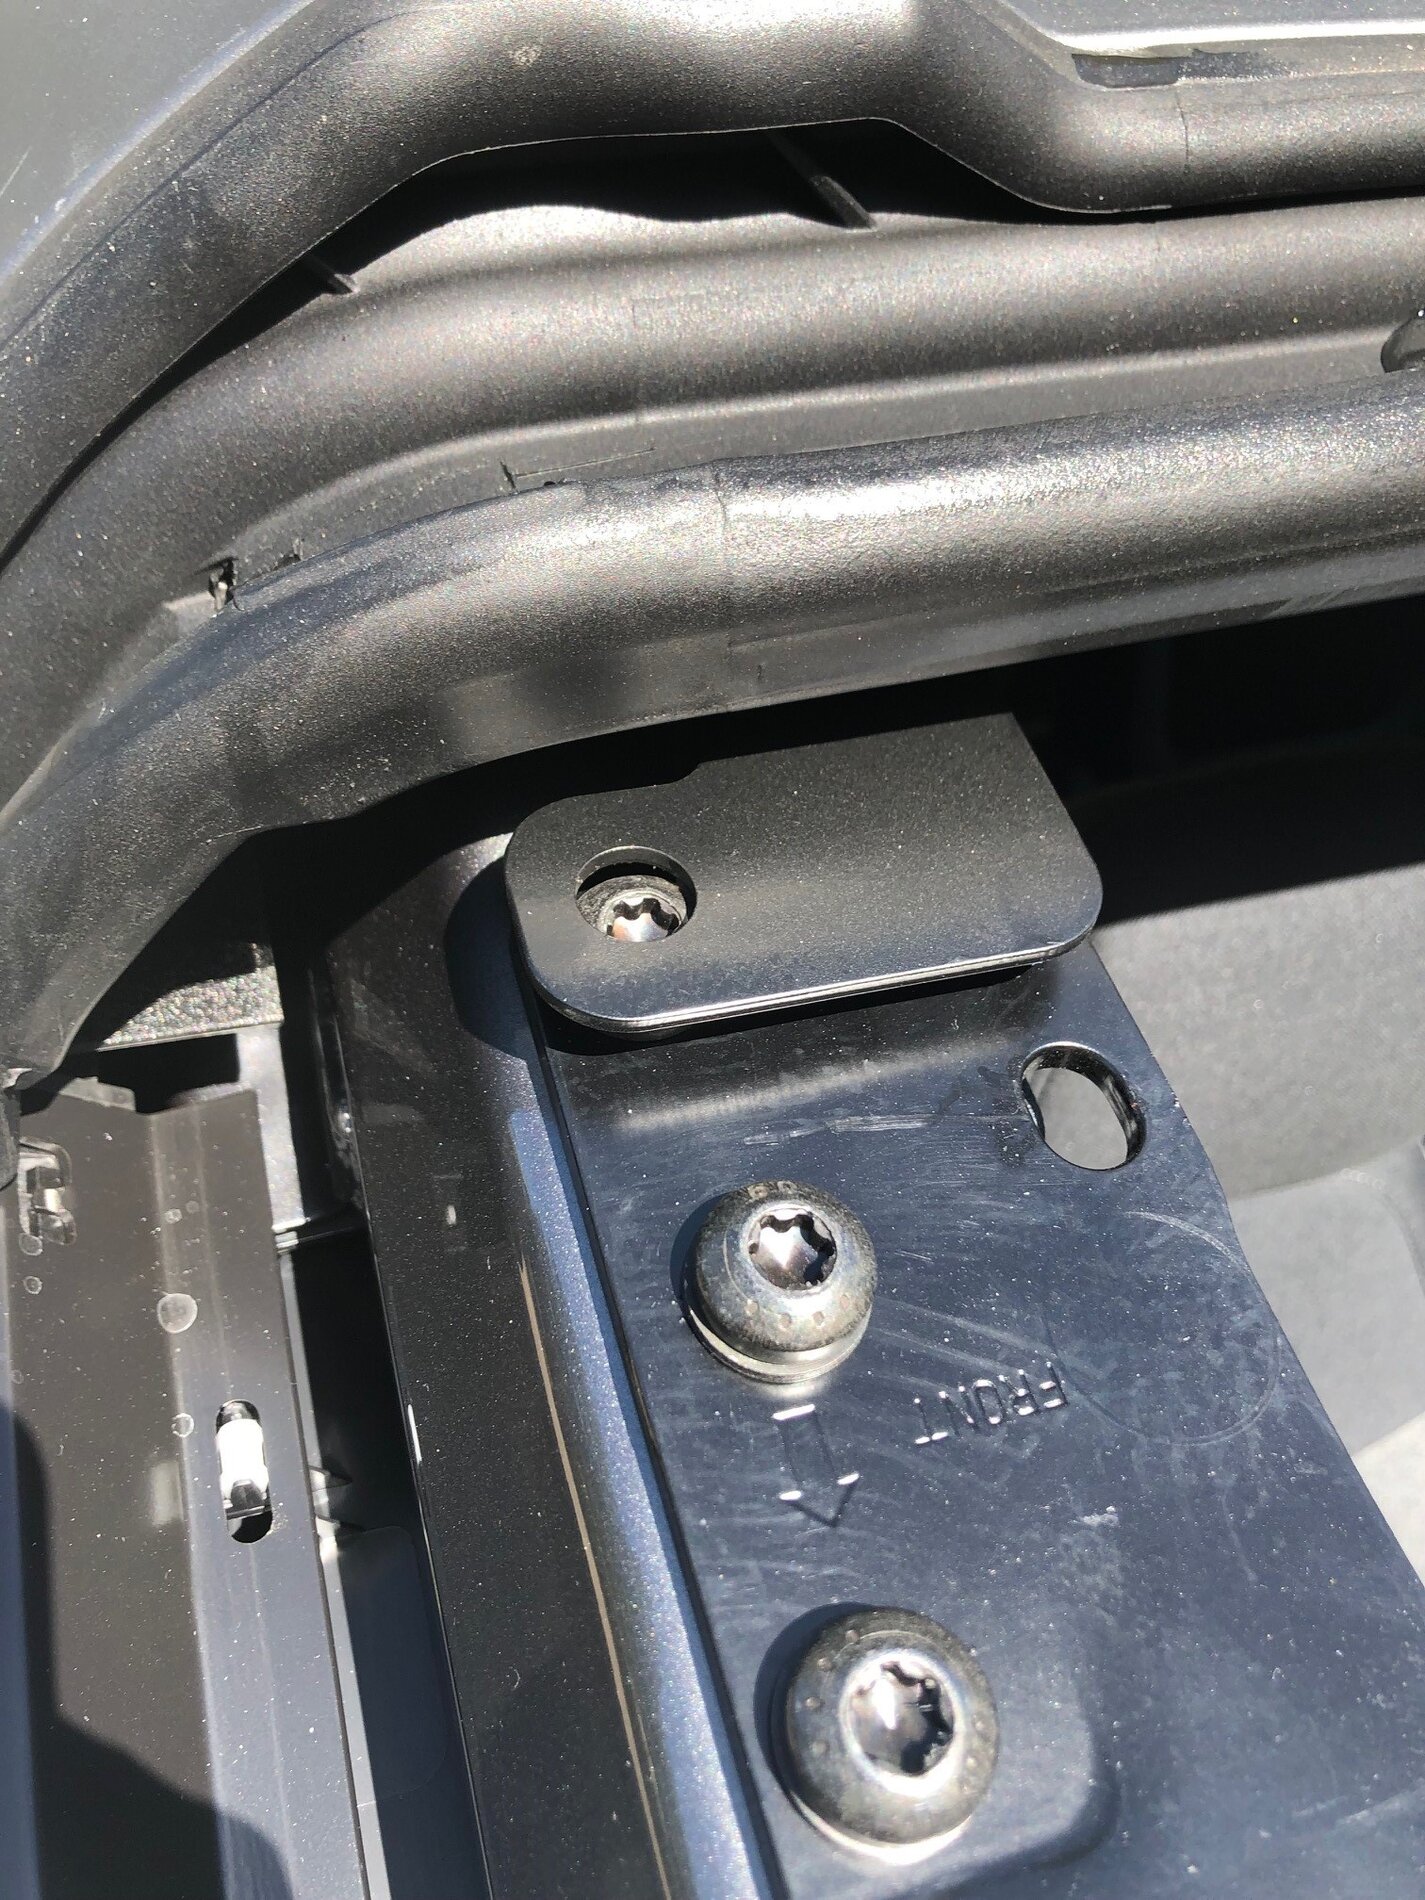 Ford Bronco MIC top installed incorrectly by factory (front bracket mounted on top screw rather than through it) 0C394433-4231-42C9-8240-F5831DC75756